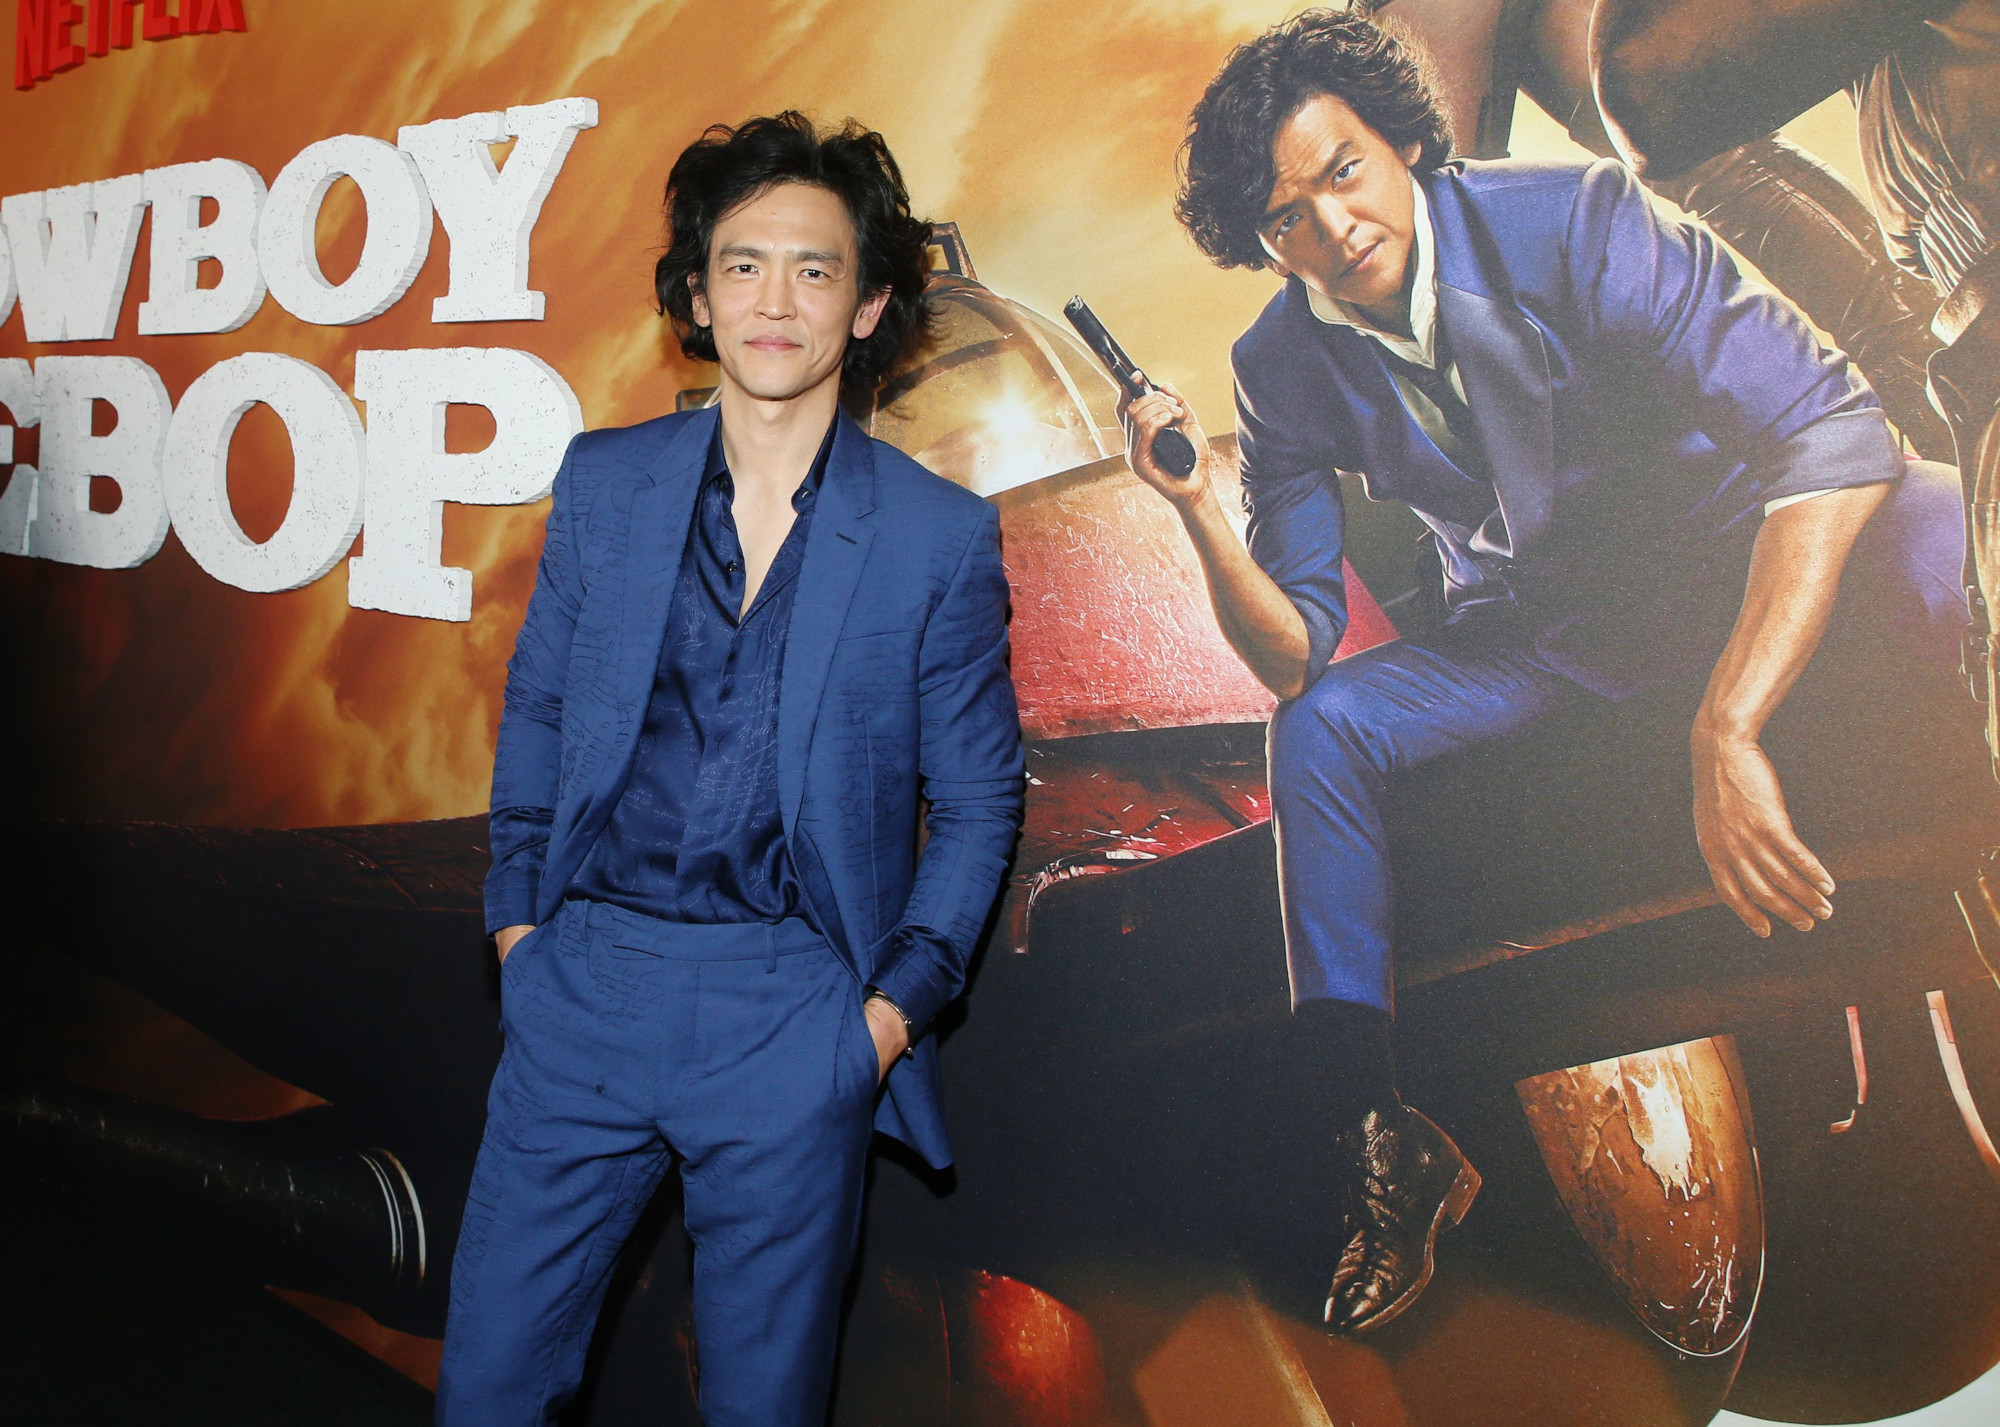 John Cho at the premiere for Netflix's live-action 'Cowboy Bebop.' He's wearing a blue suit and standing in front of an image promoting the series.